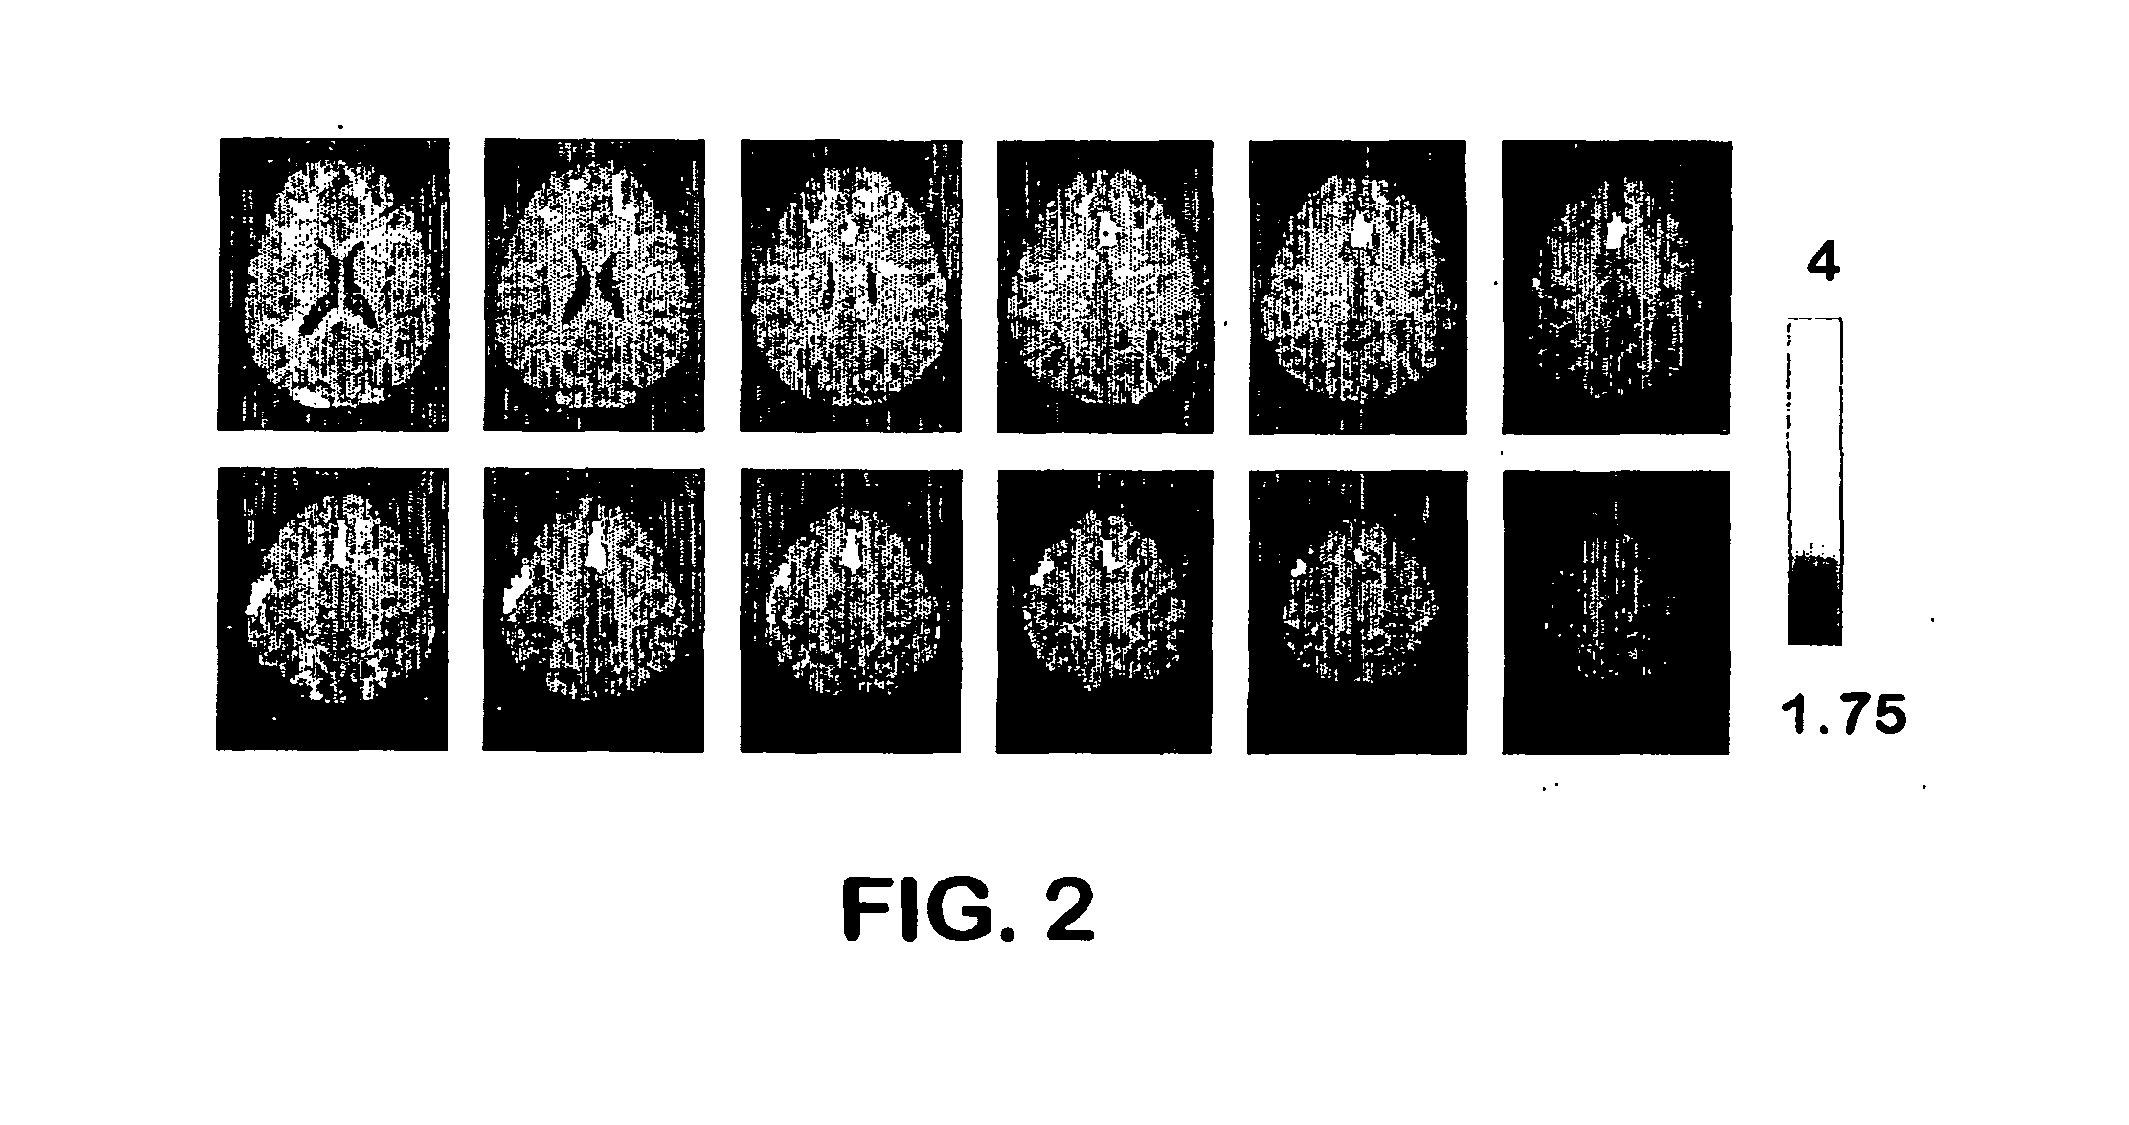 Functional brain imaging for detecting and assessing deception and concealed recognition, and cognitive/emotional response to information